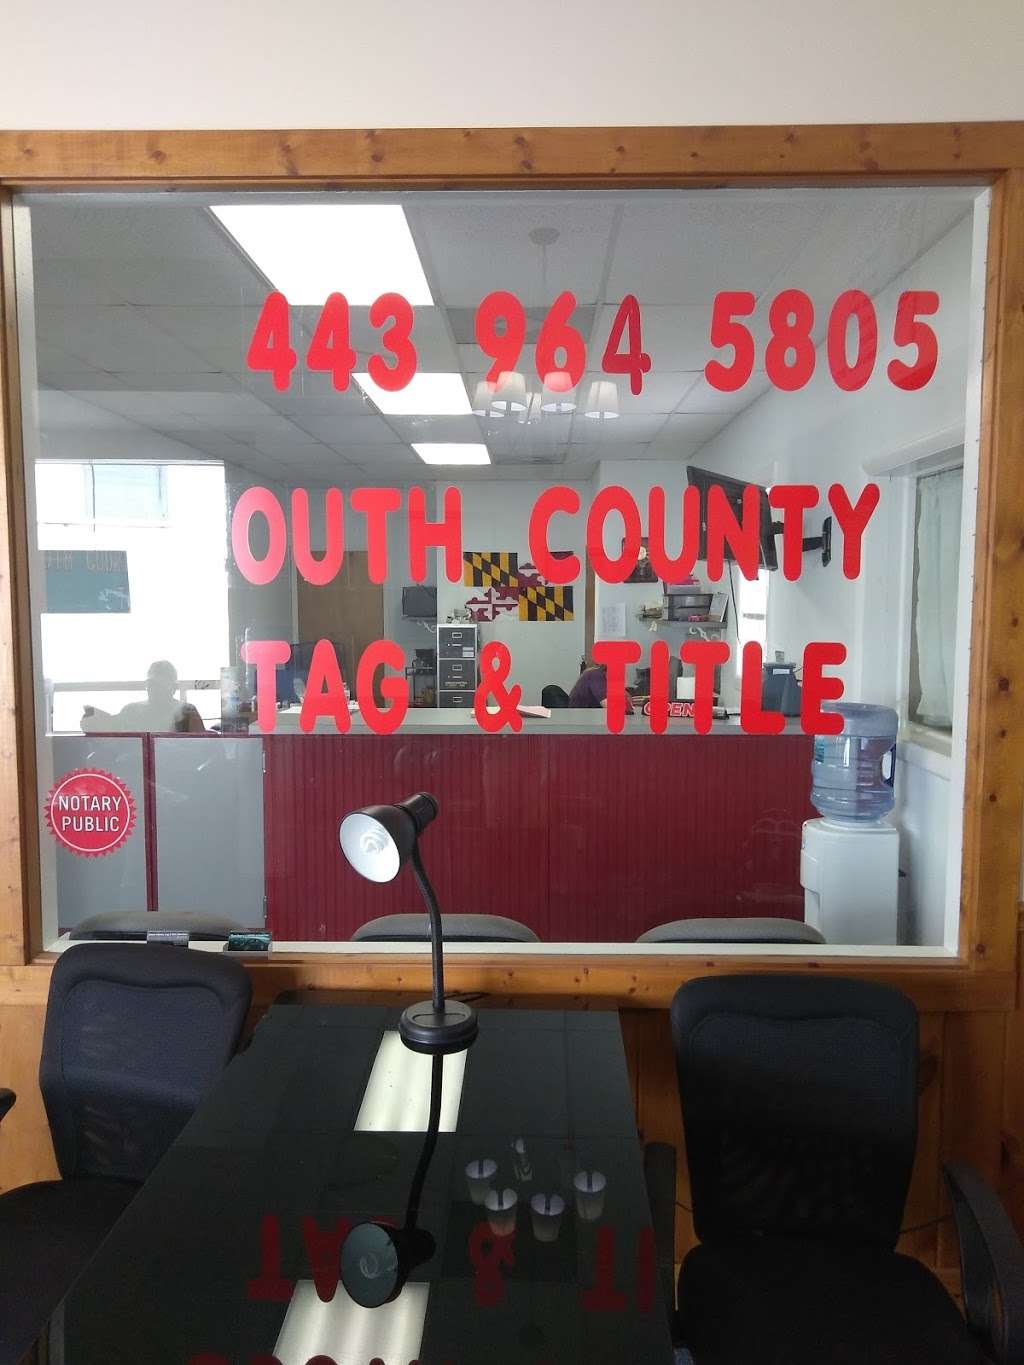 South County tag and title service | 167 Thomas Ave, Owings, MD 20736, USA | Phone: (443) 964-5805